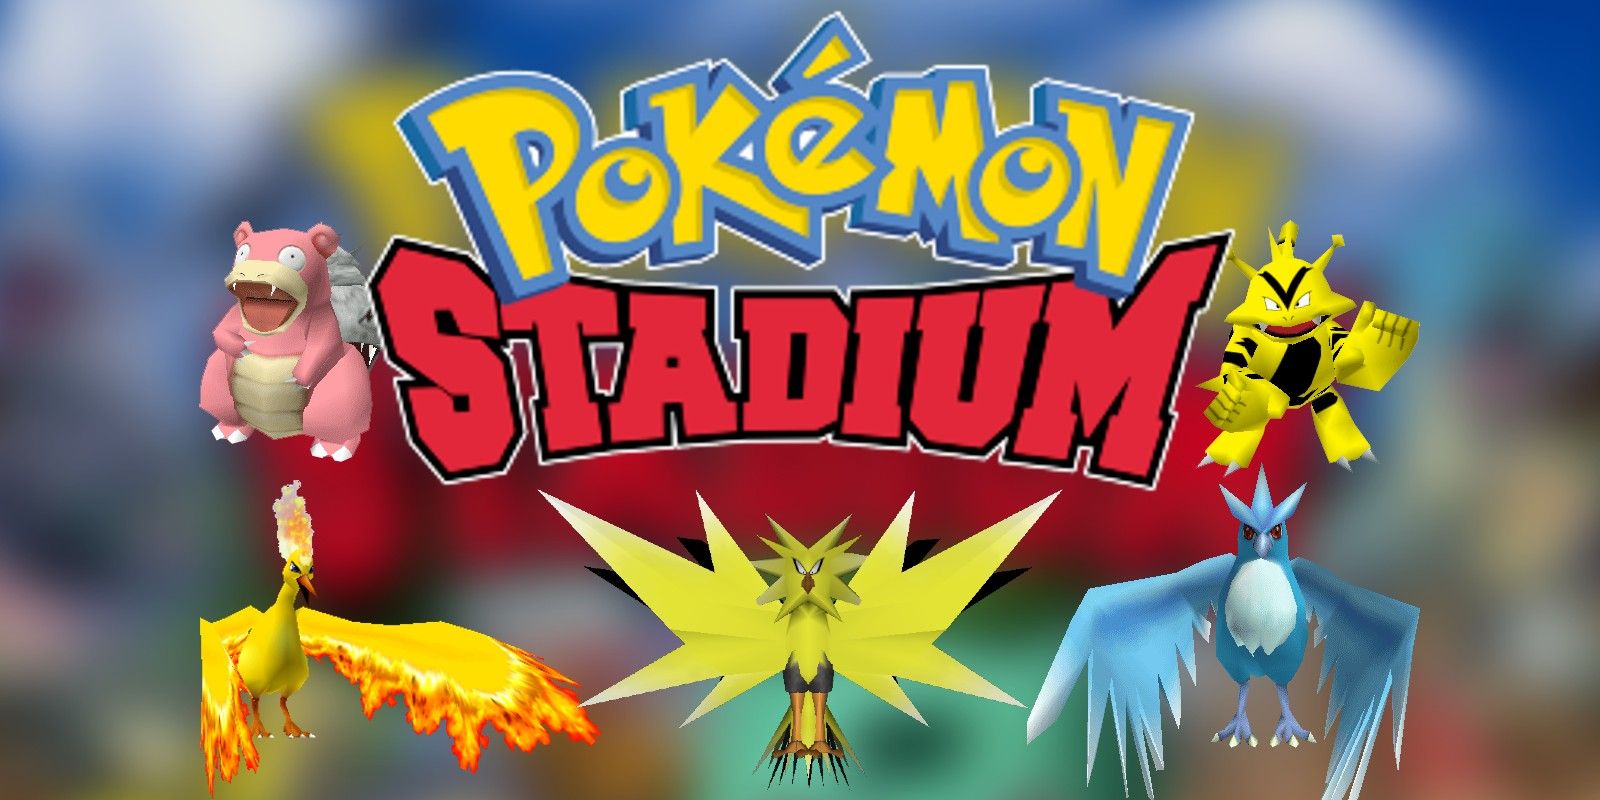 Pokemon Stadium's selection of the first 151 Pokemon which includes Moltres, Articuno, and Zapdos.